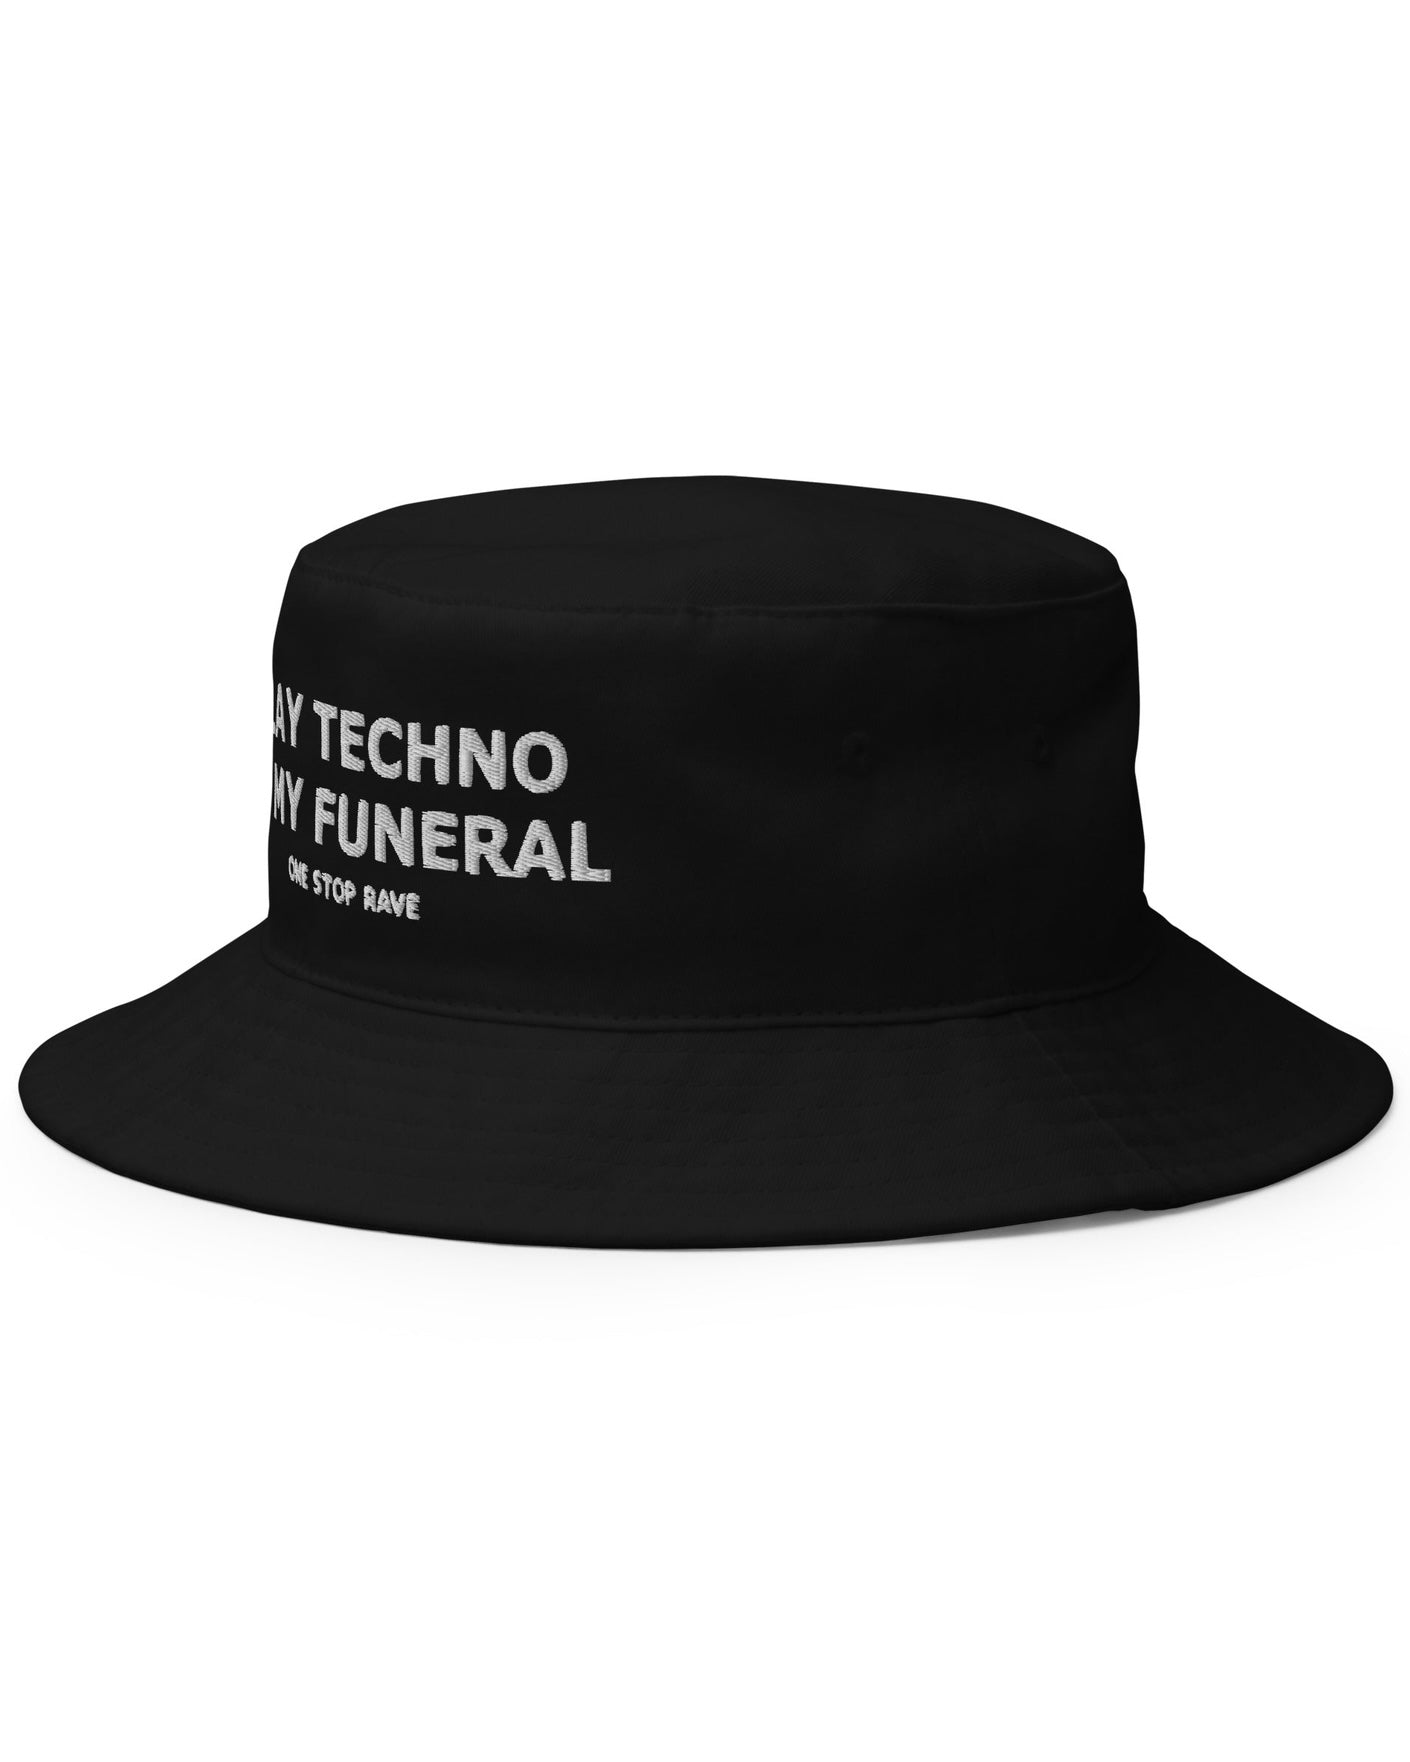 Play Techno At My Funeral Bucket Hat, Bucket Hat, - One Stop Rave